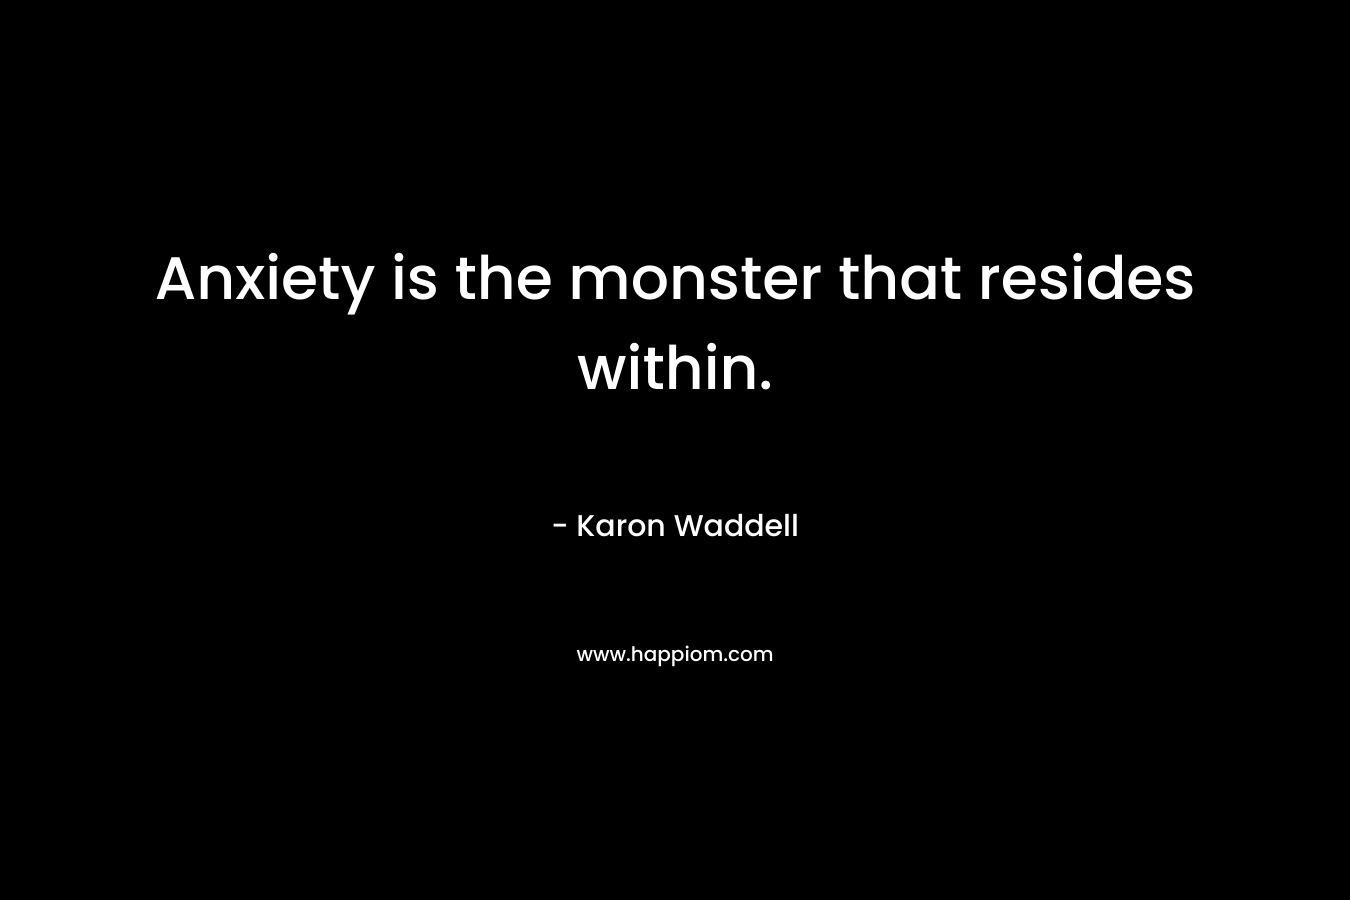 Anxiety is the monster that resides within. – Karon Waddell